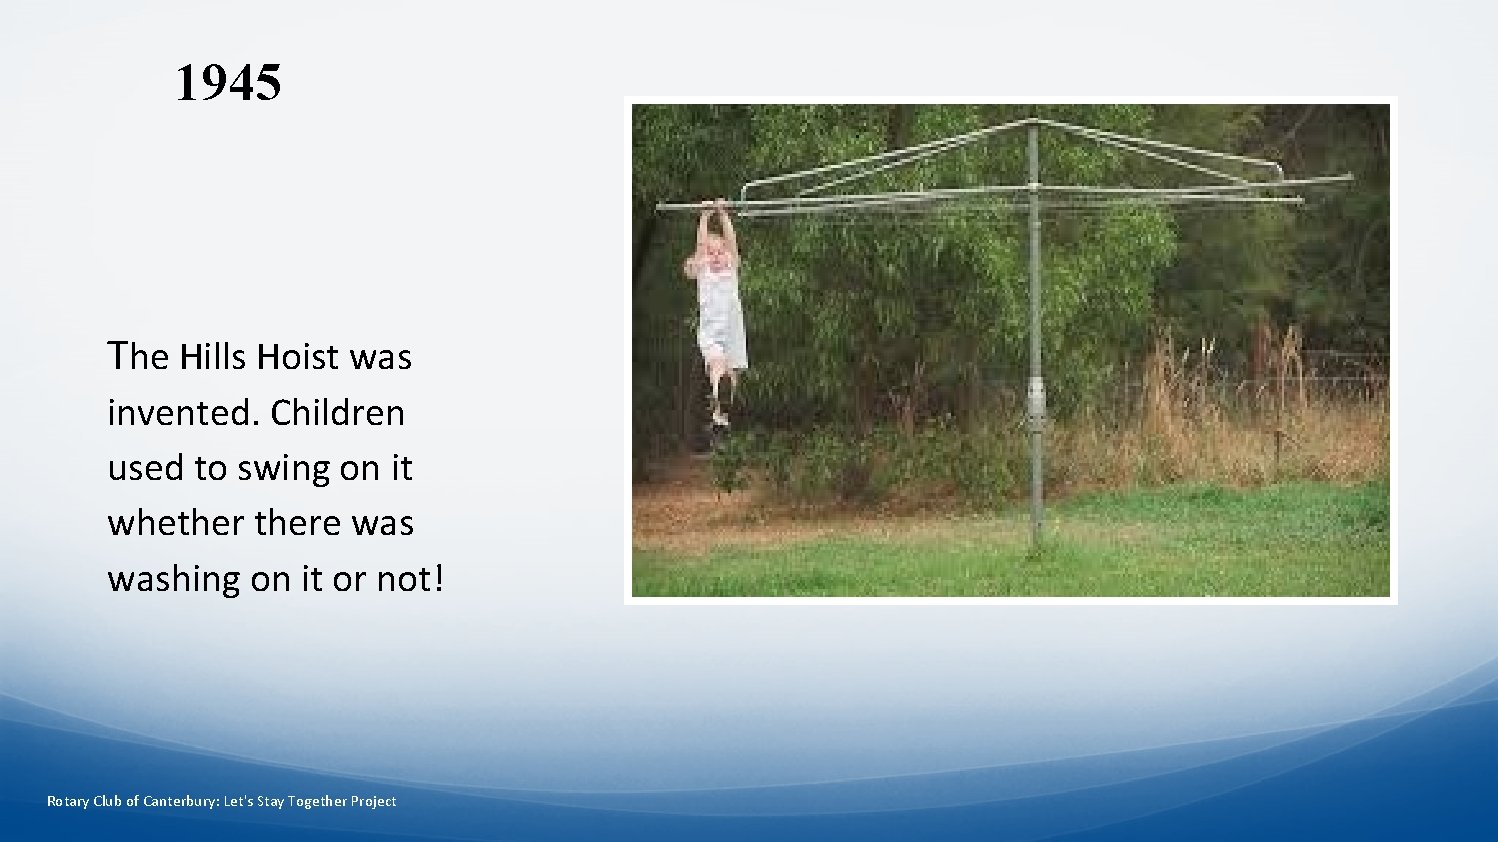 1945 The Hills Hoist was invented. Children used to swing on it whethere washing